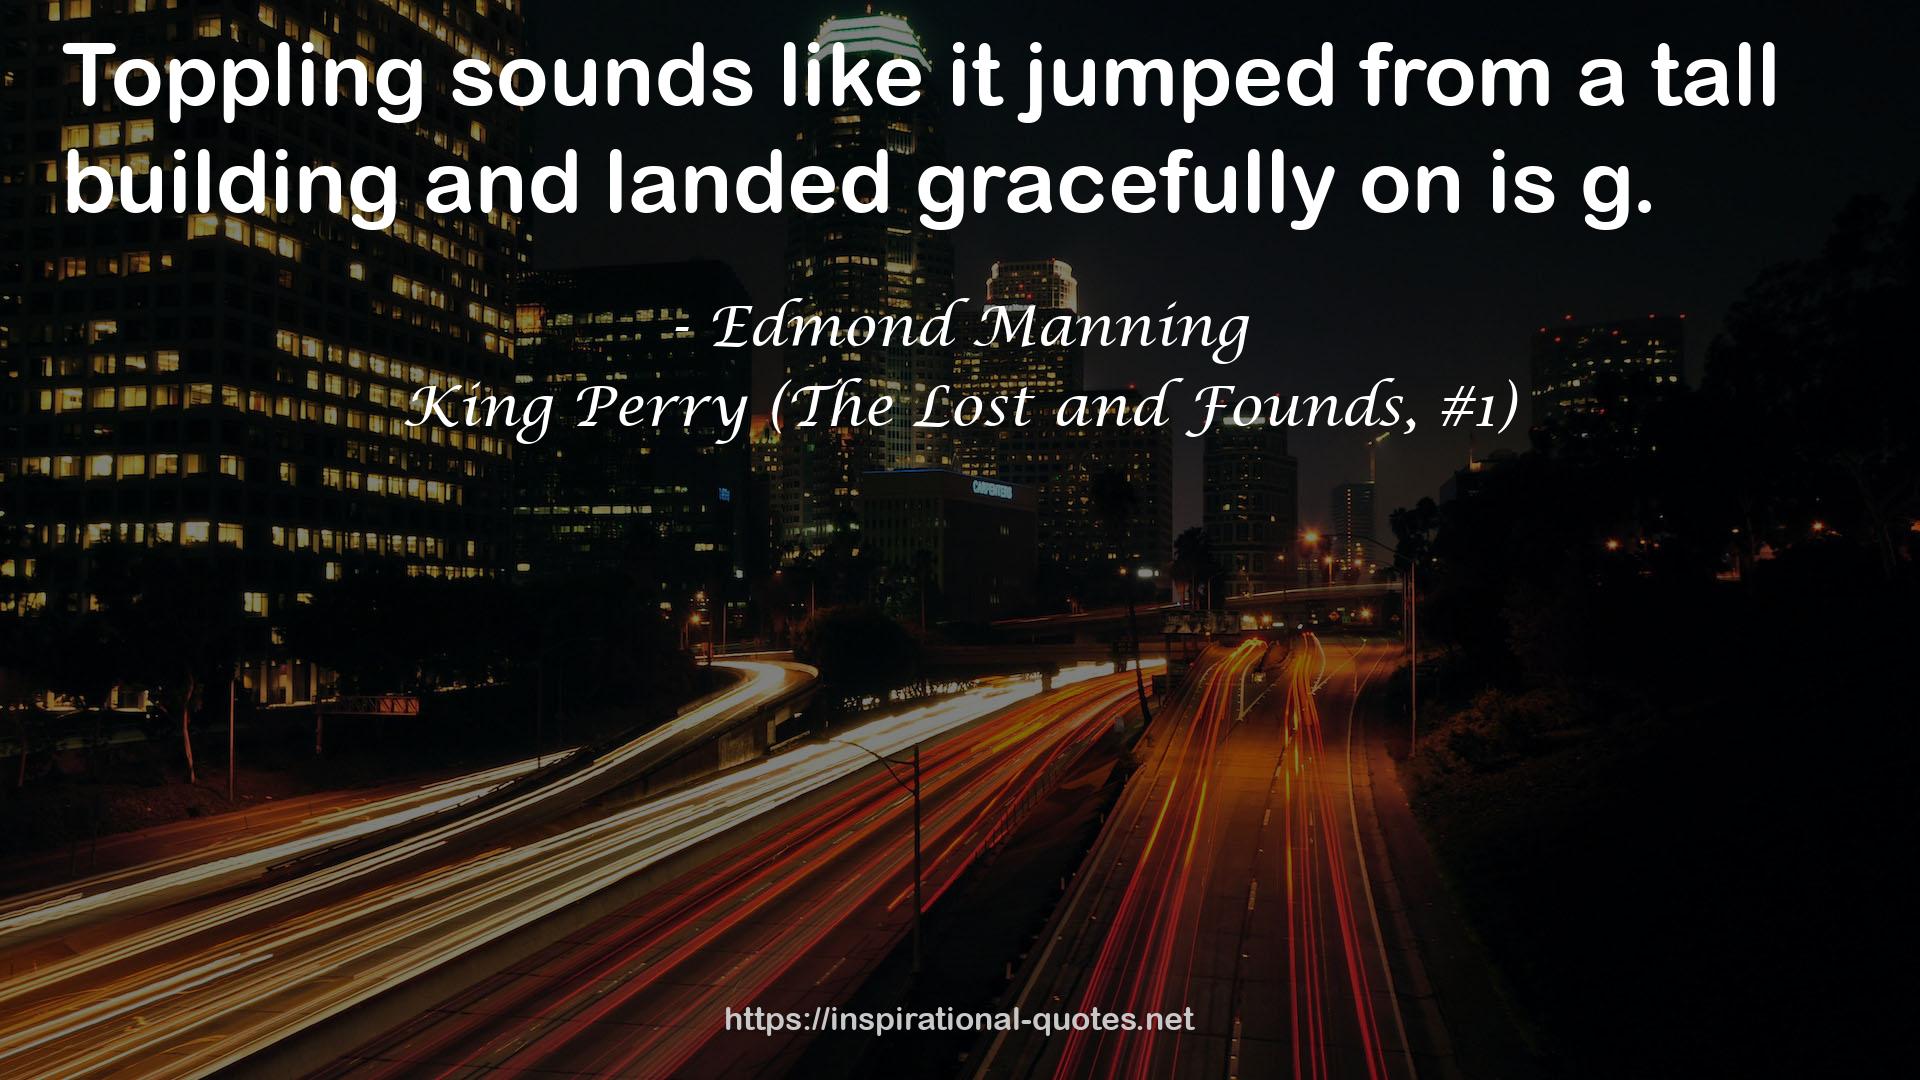 King Perry (The Lost and Founds, #1) QUOTES